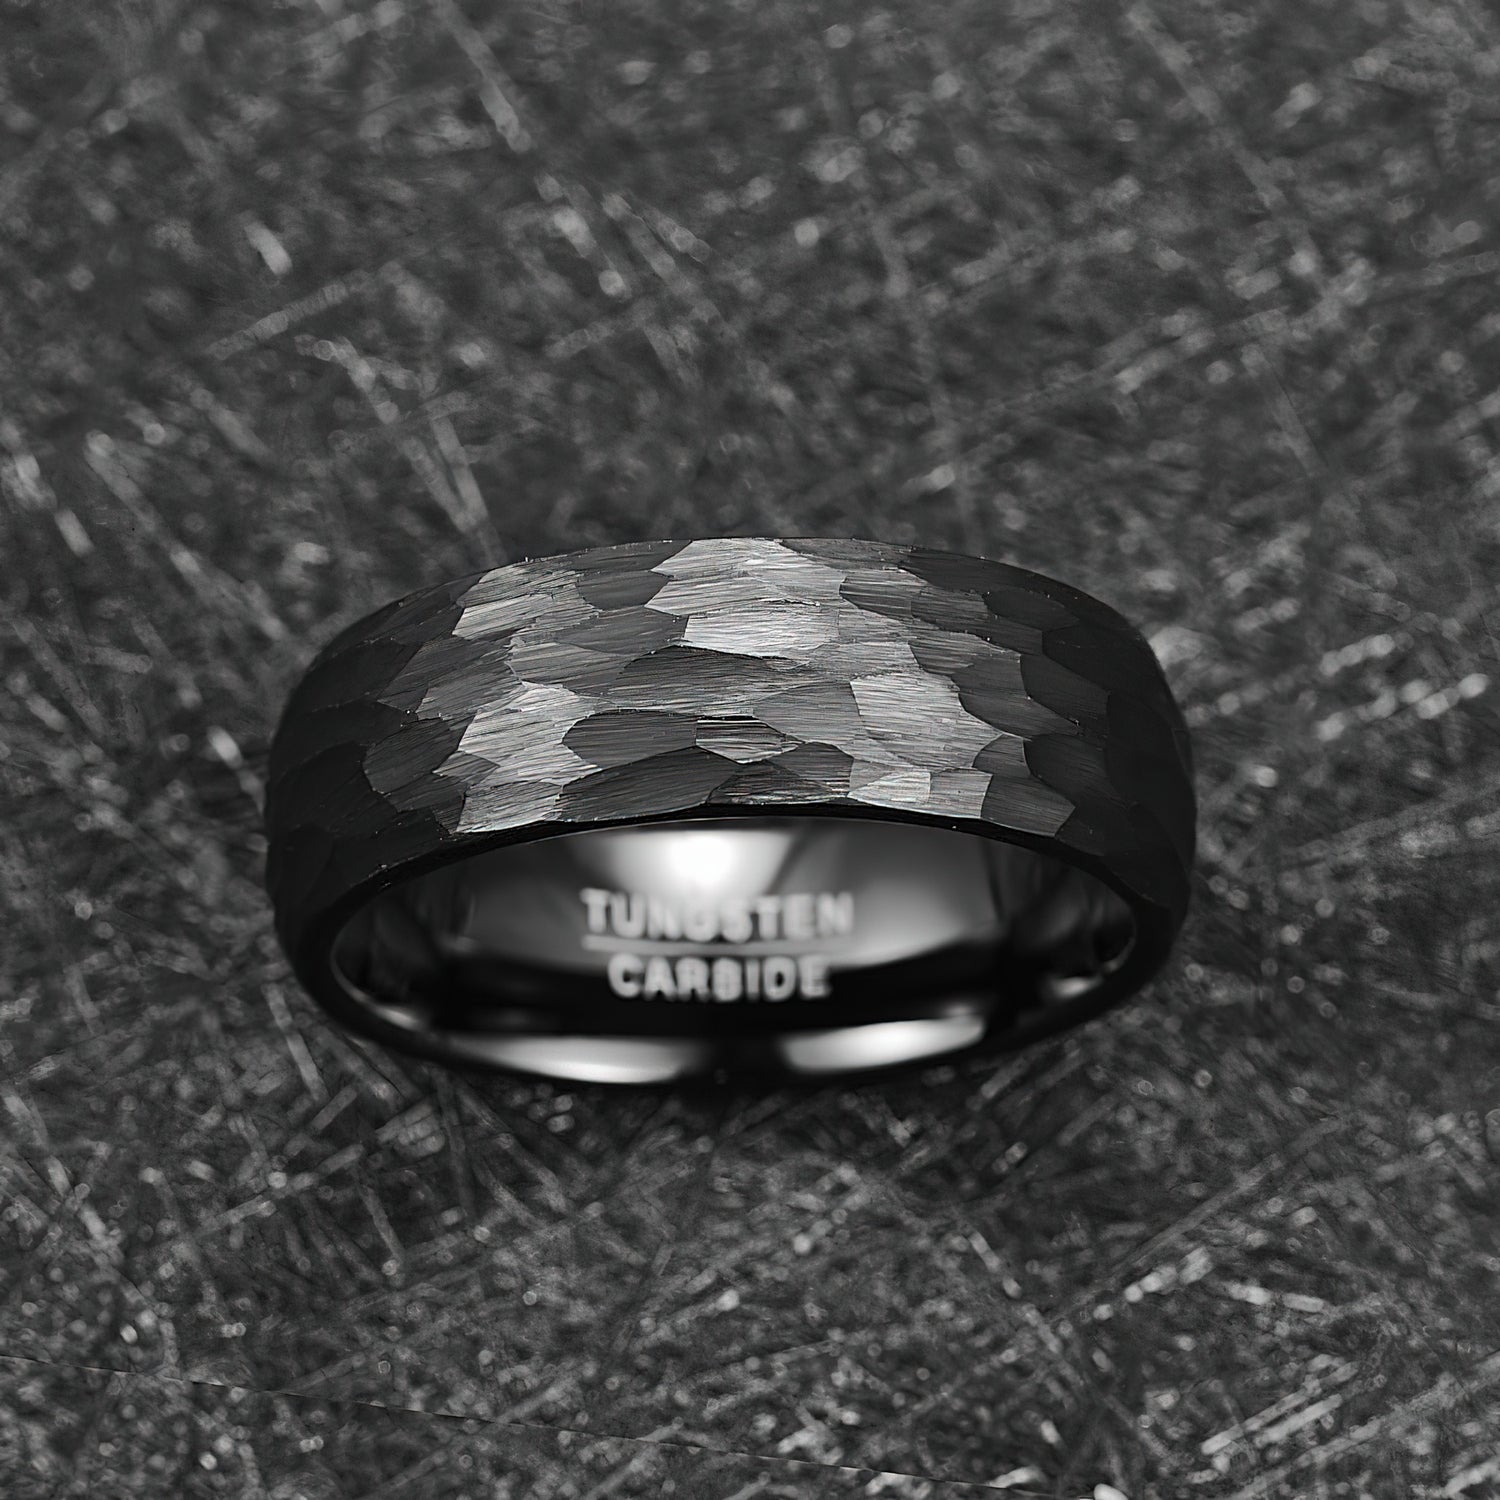 Men's Hammered and brushed finish tungsten ring